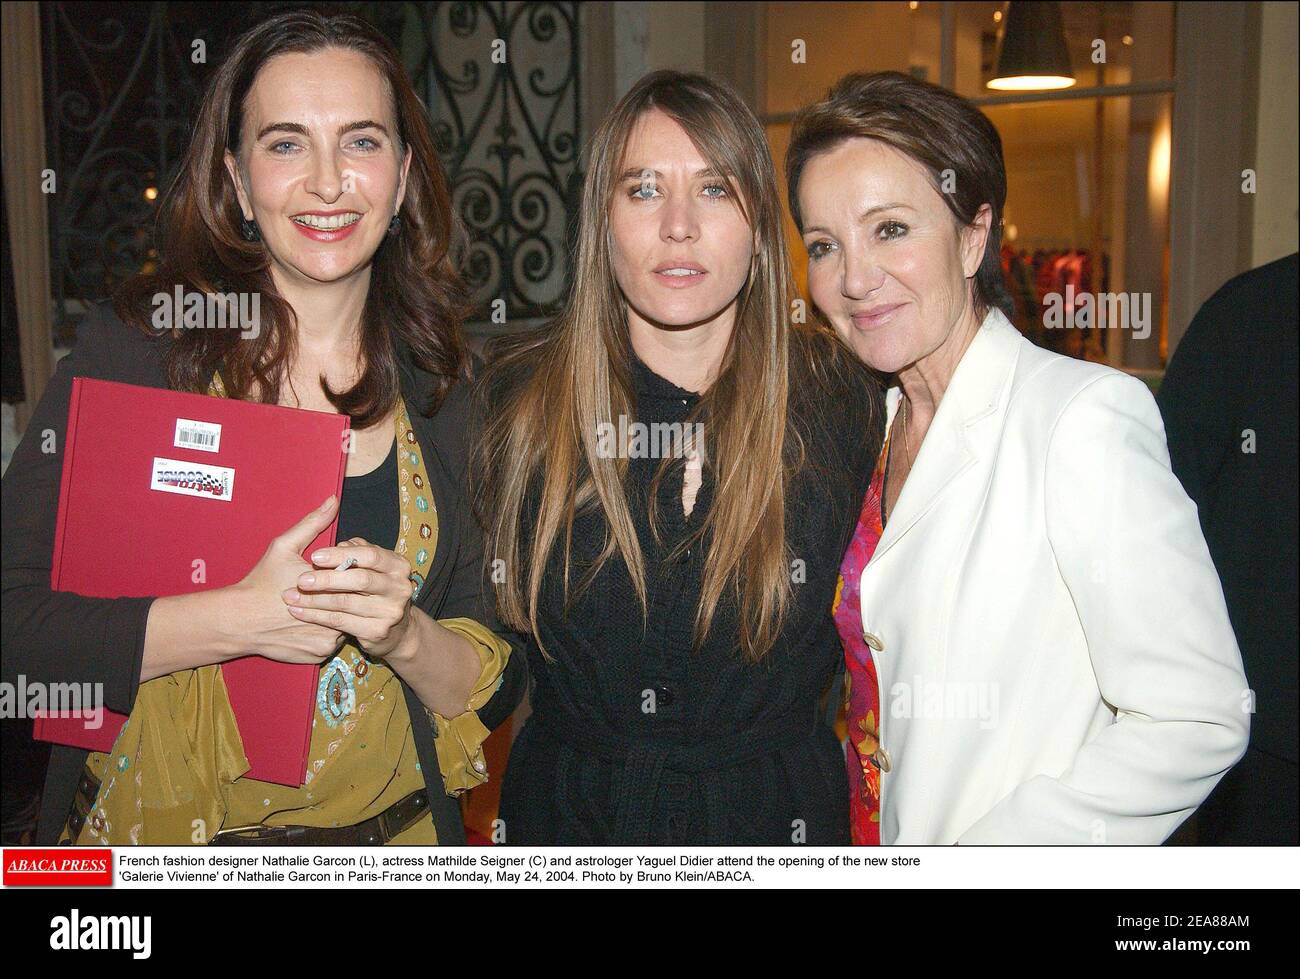 French fashion designer Nathalie Garcon (L), actress Mathilde Seigner (C) and astrologer Yaguel Didier attend the opening of the new store 'Galerie Vivienne' of Nathalie Garcon in Paris-France on Monday, May 24, 2004. Photo by Bruno Klein/ABACA. Stock Photo